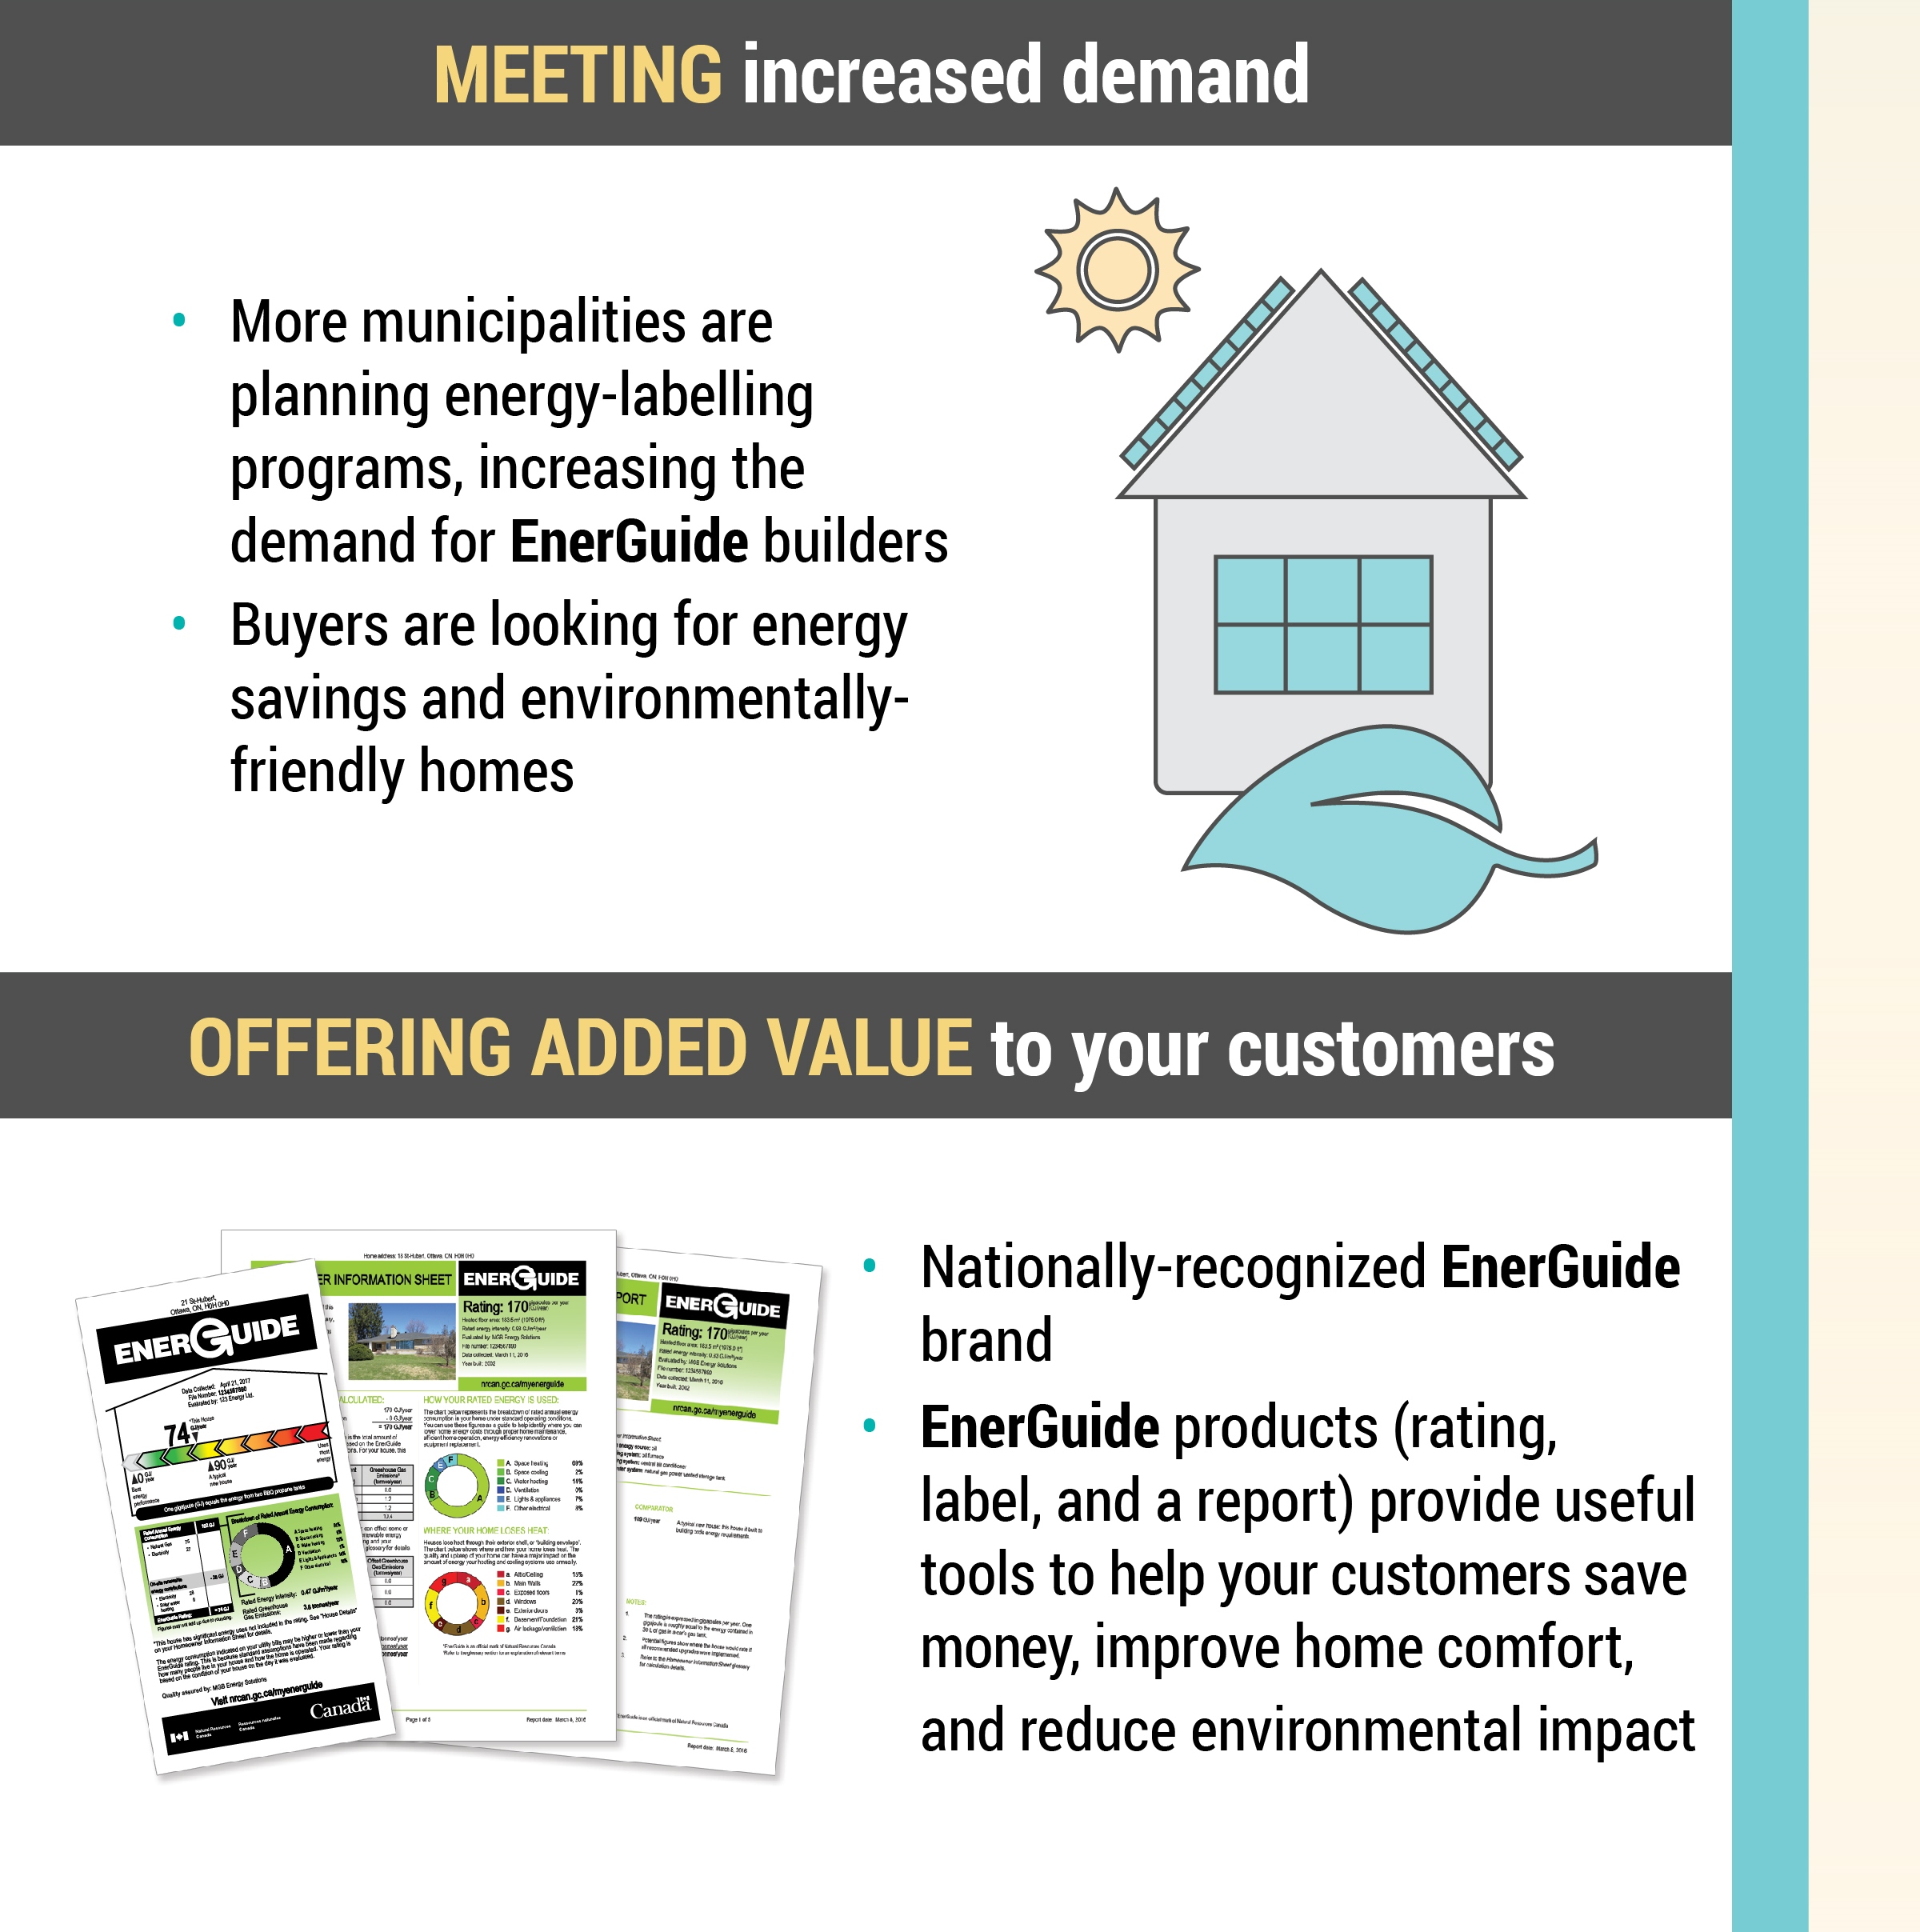 Two benefits for builders when using EnerGuide